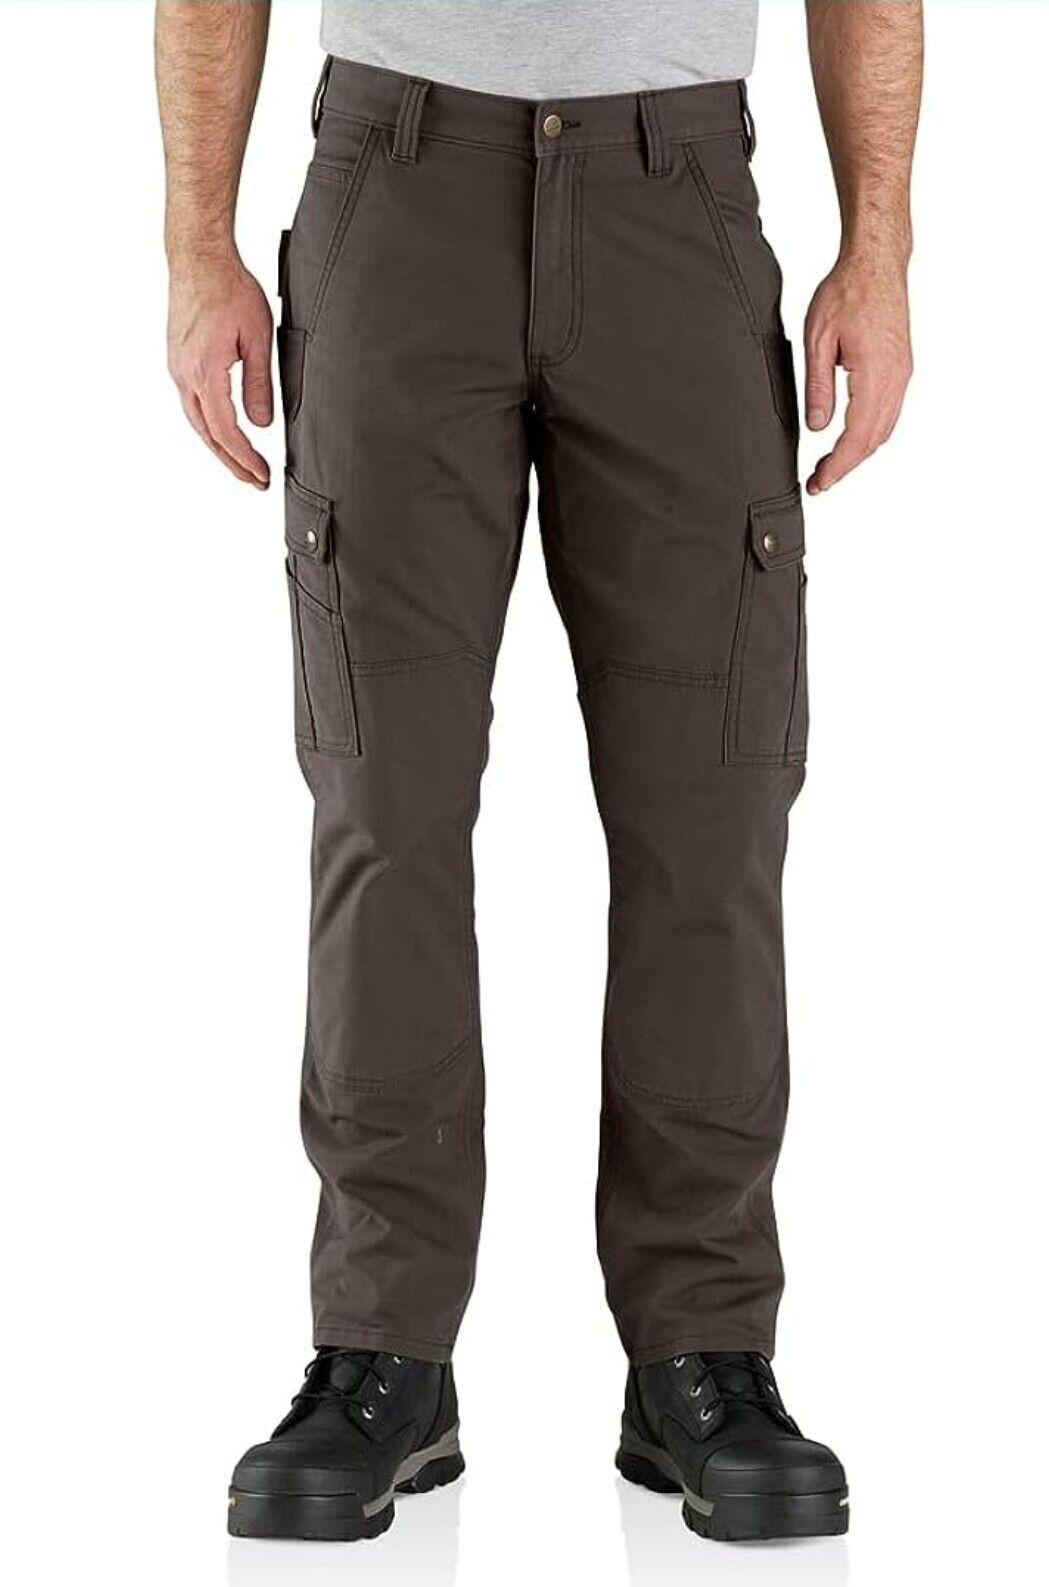 Picture 1 of 17 Men's CARHARTT 38x30 RIPSTOP CARGO PANTS RELAXED FIT B342 DARK COFFEE / BROWN